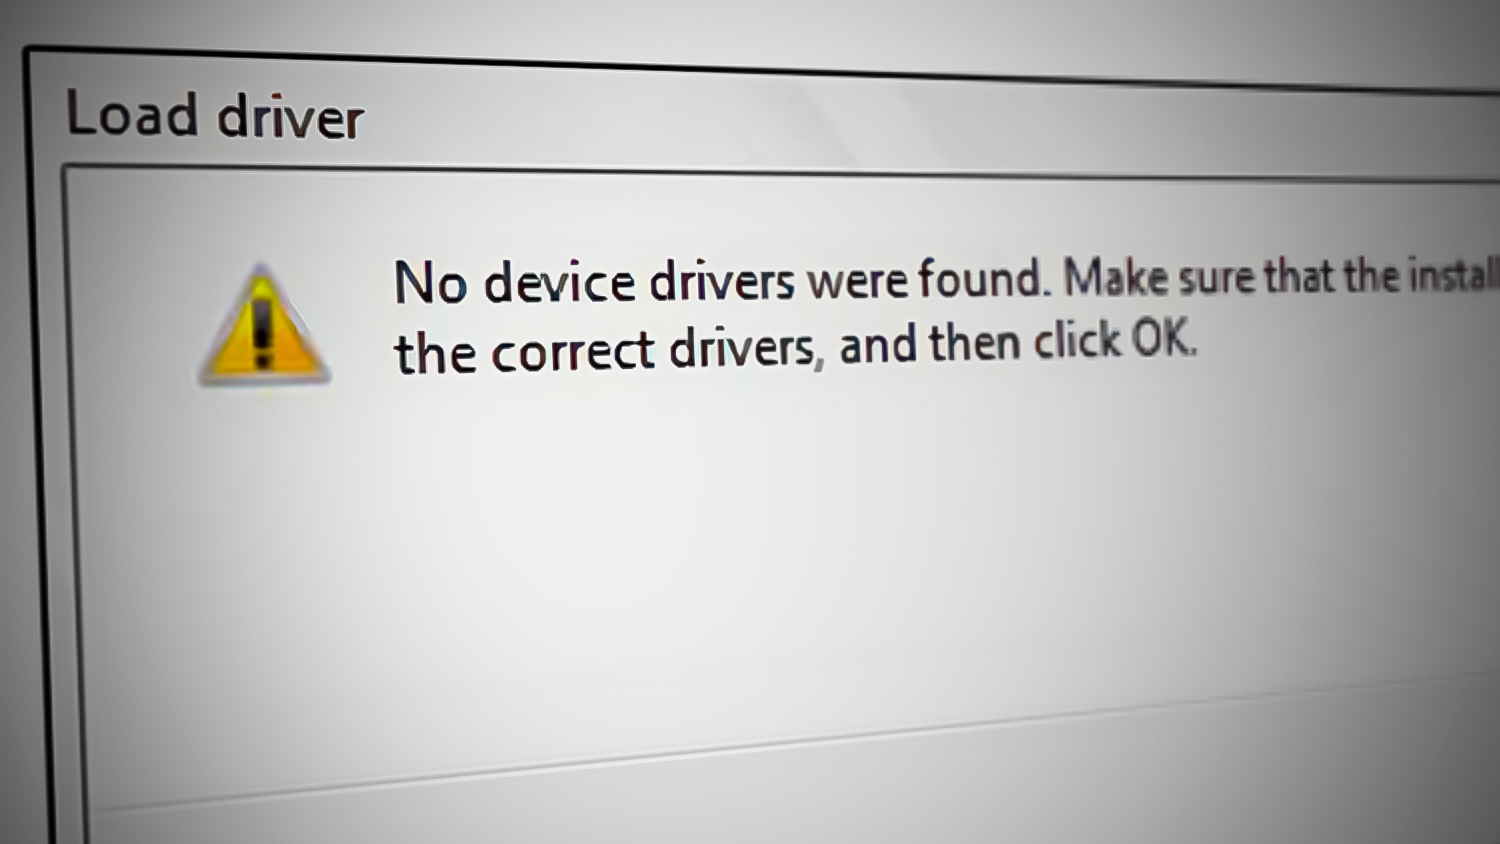 How to Fix No Device Drivers Were Found While Installing Windows?